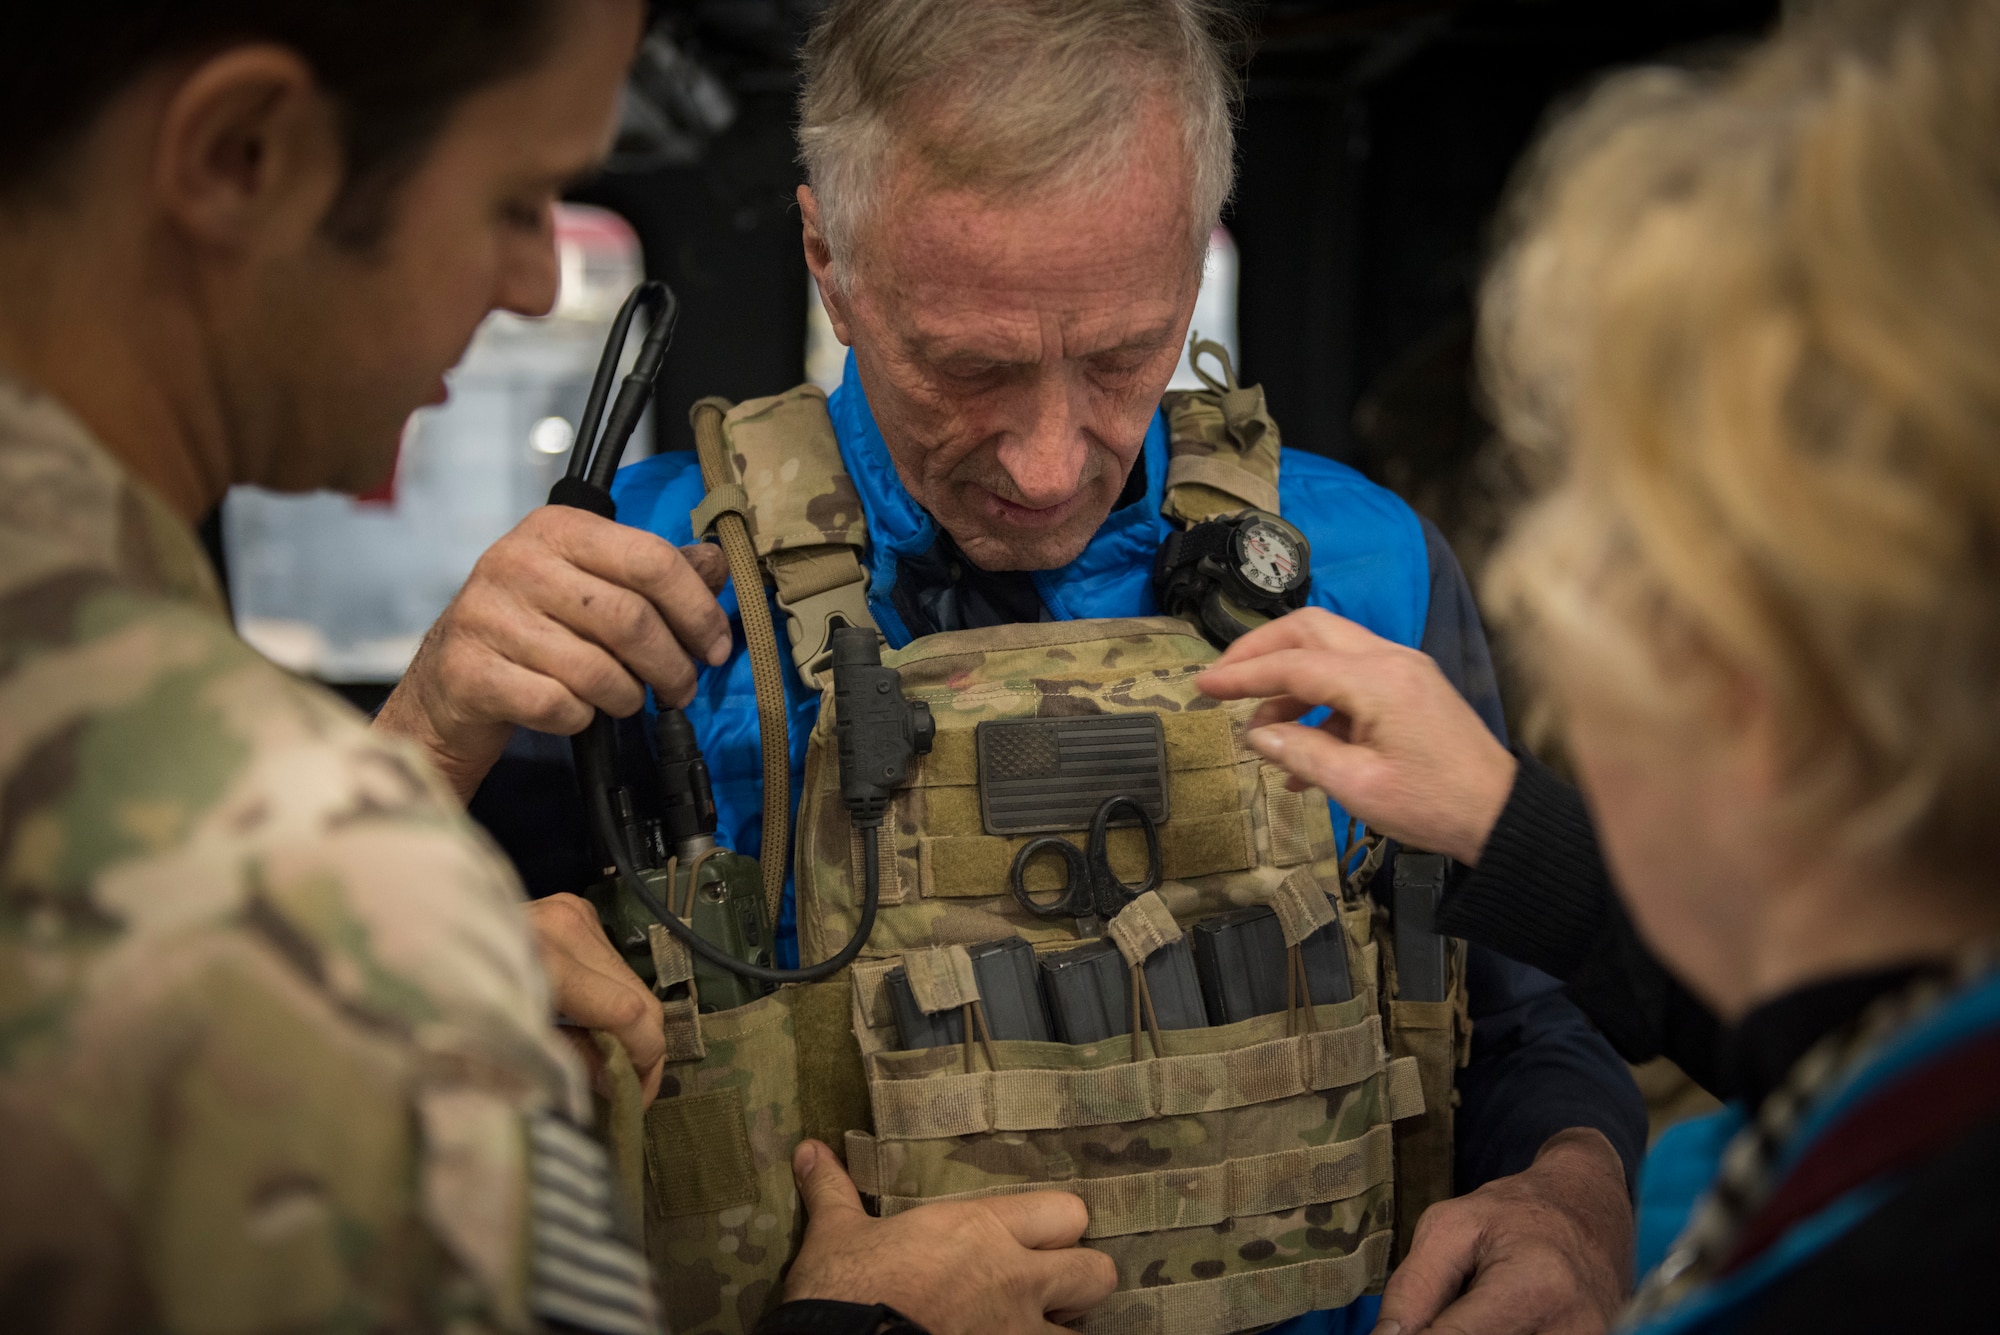 Spencer Cottam tries on a tactical vest in the 823rd Maintenance Squadron hangar at Nellis Air Force Base, Nevada, Nov. 16, 2018. Having taken part in multiple rescues as a civilian, Spencer described the 66th Rescue Squadron as one of the most professional and precise rescues he has ever seen. Spencer visited the 66th RQS with his nephew Dr. Daniel Cottam, following Dr. Cottam’s rescue after a fall near Zion Canyon left him severely injured. (U.S. Air Force photo by Airman 1st Class Andrew D. Sarver)